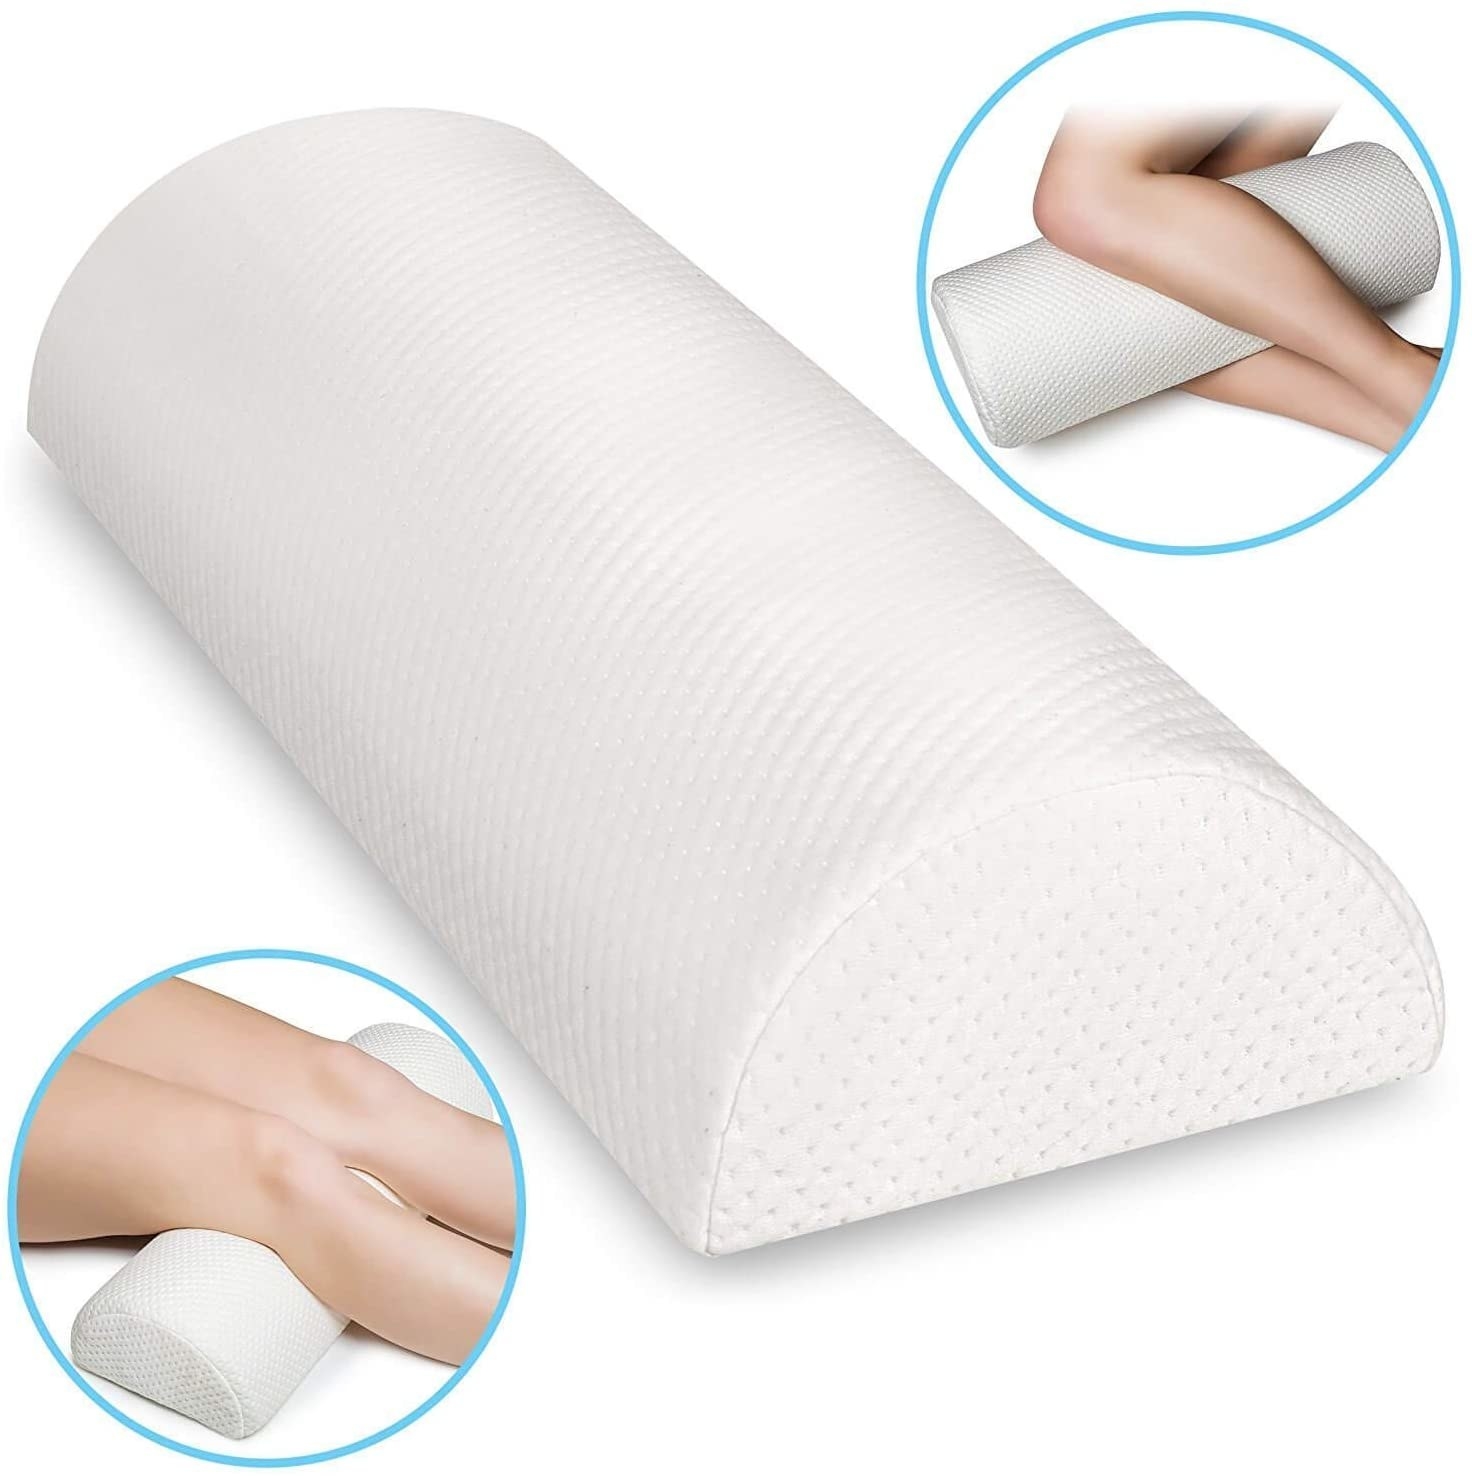 The pillow wedge with close-ups of the pillow between someone knees